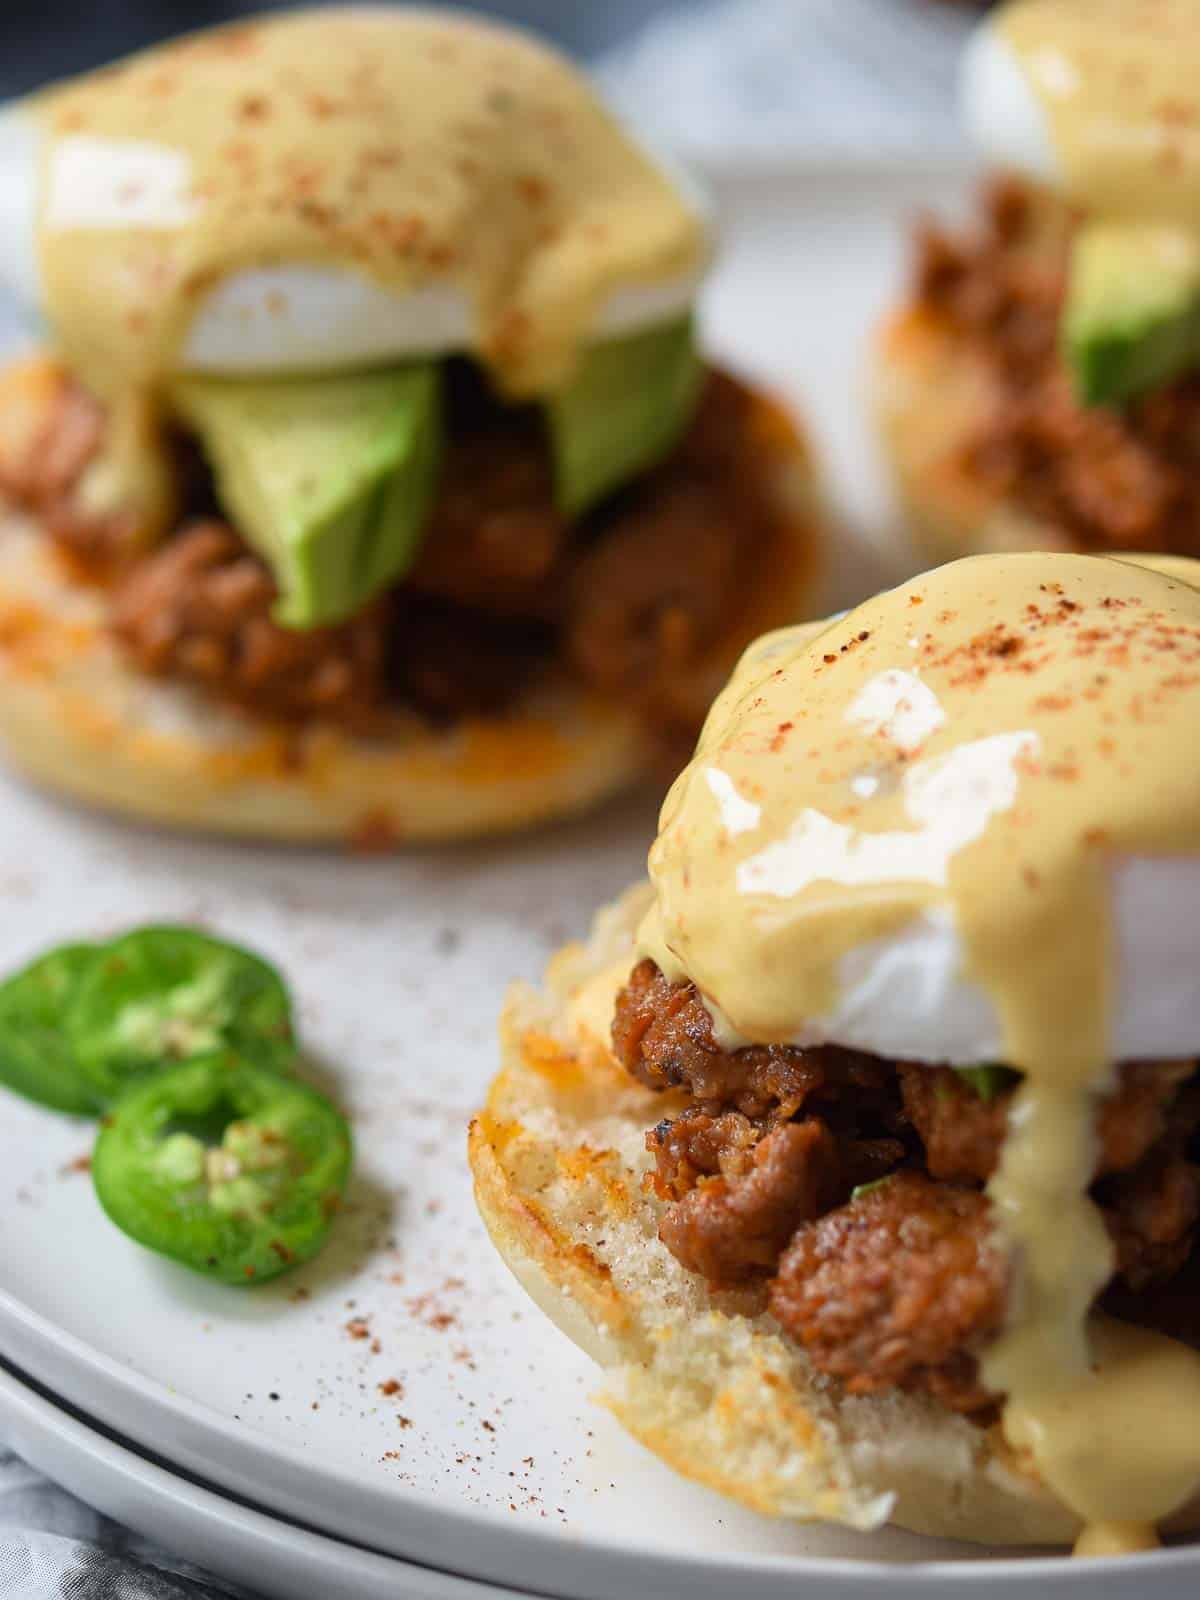 Close-up of Mexican eggs benedict with hollandaise sauce dripping down.